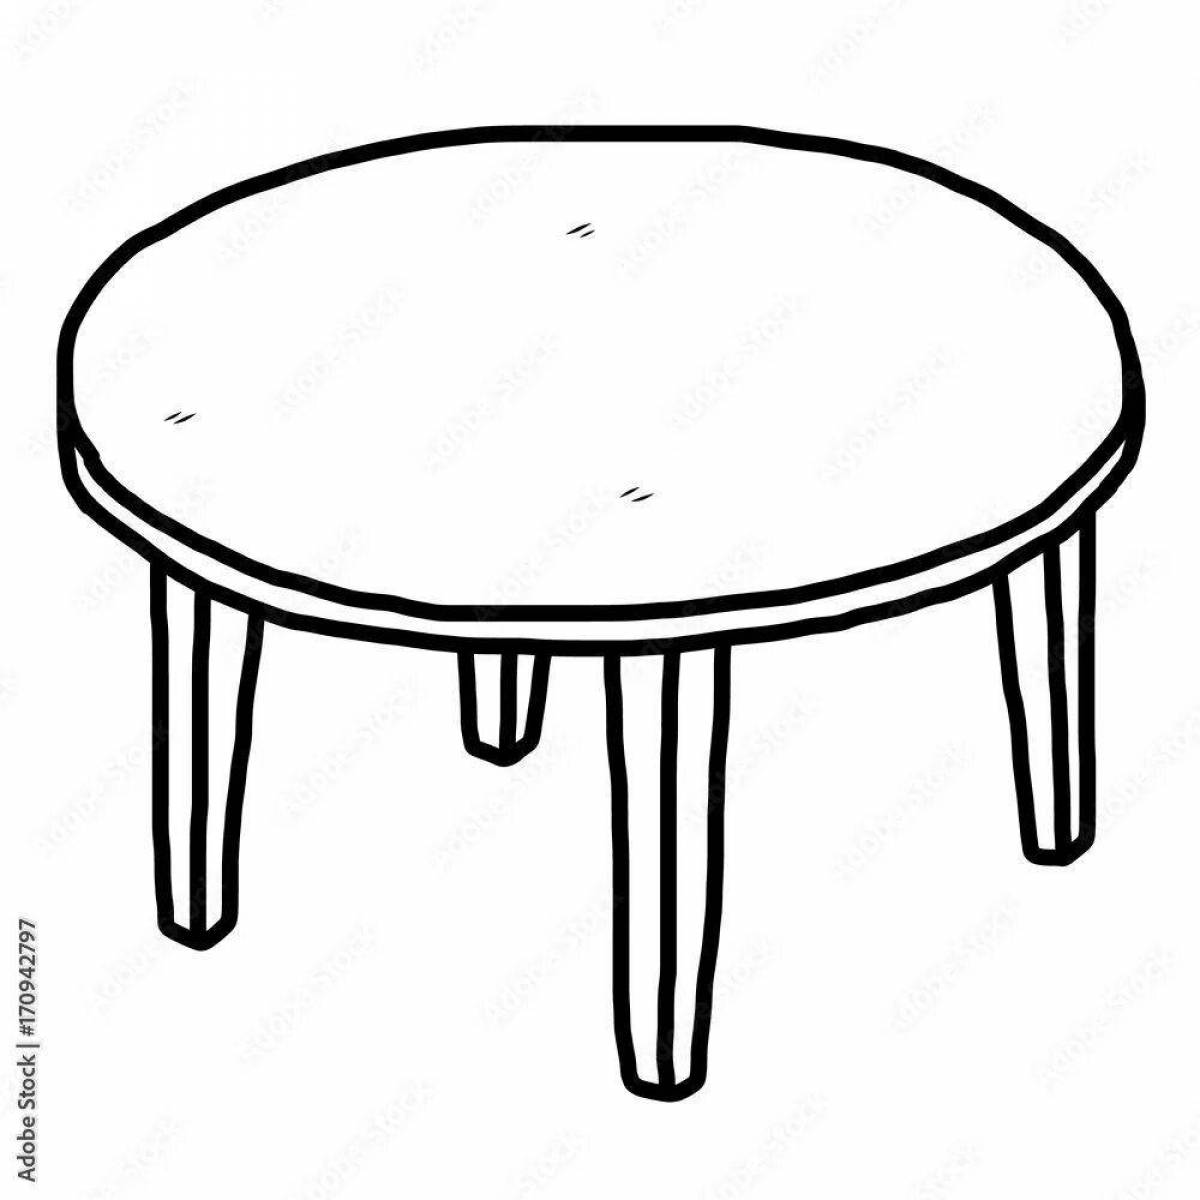 Playful round table coloring page